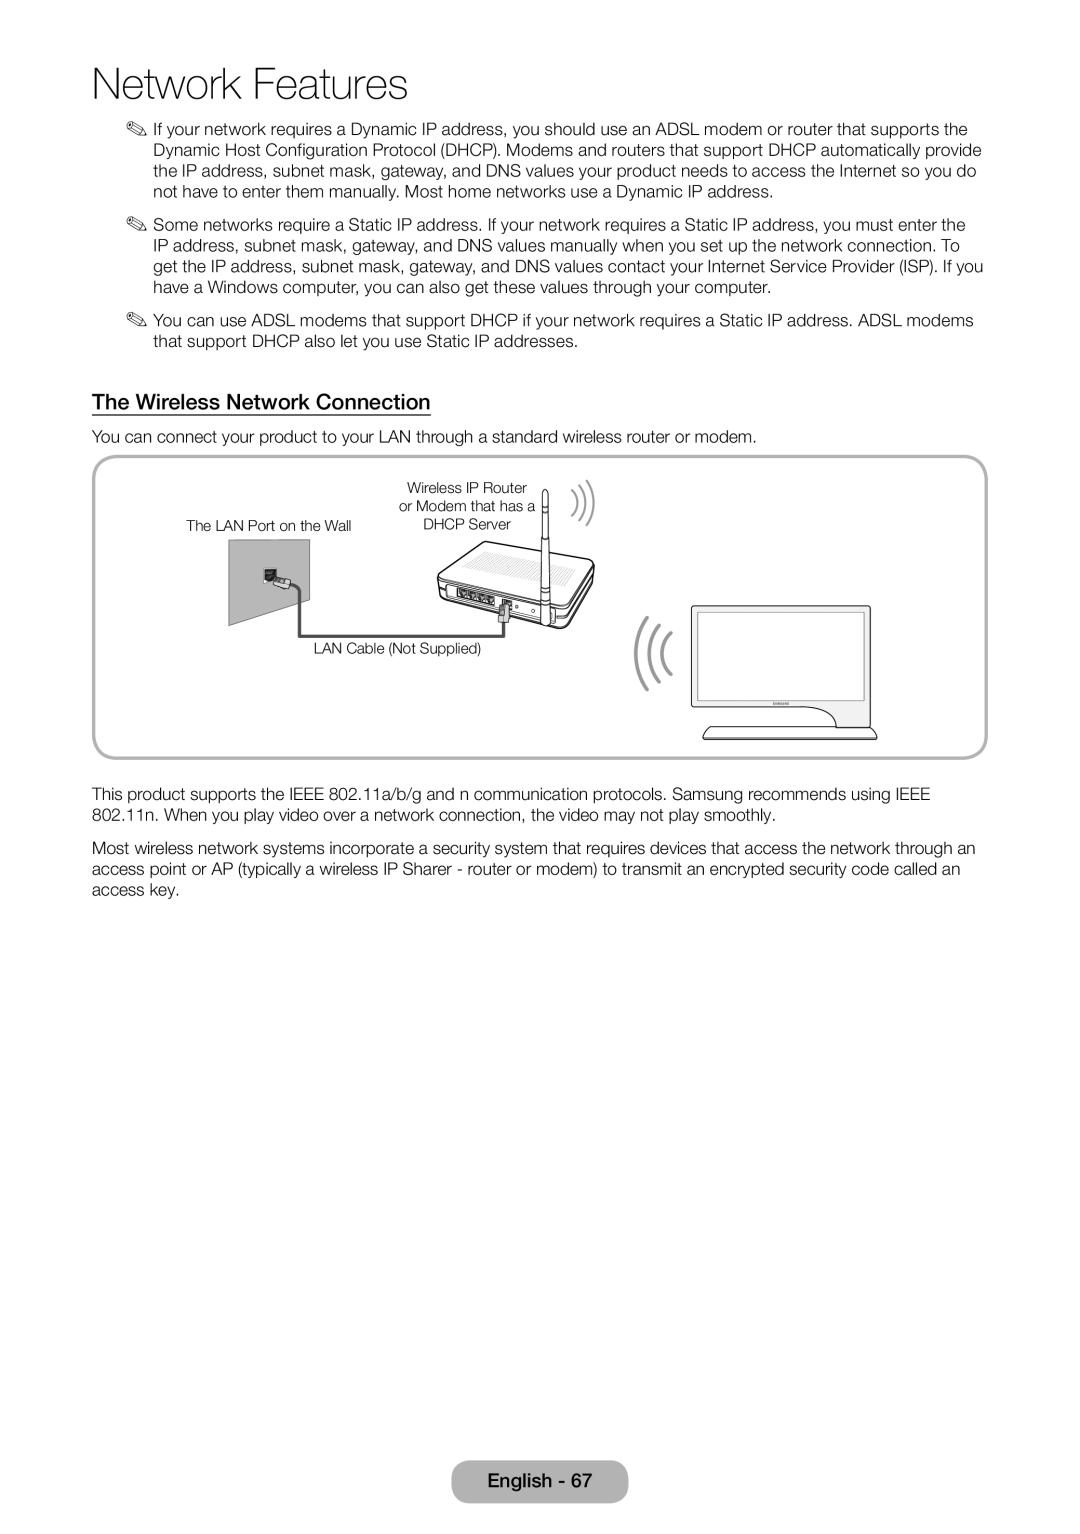 Samsung LT27B750EX/CI, LT24B750EWV/EN, LT27B750EWV/EN, LT24B750EW/EN manual The Wireless Network Connection, Network Features 